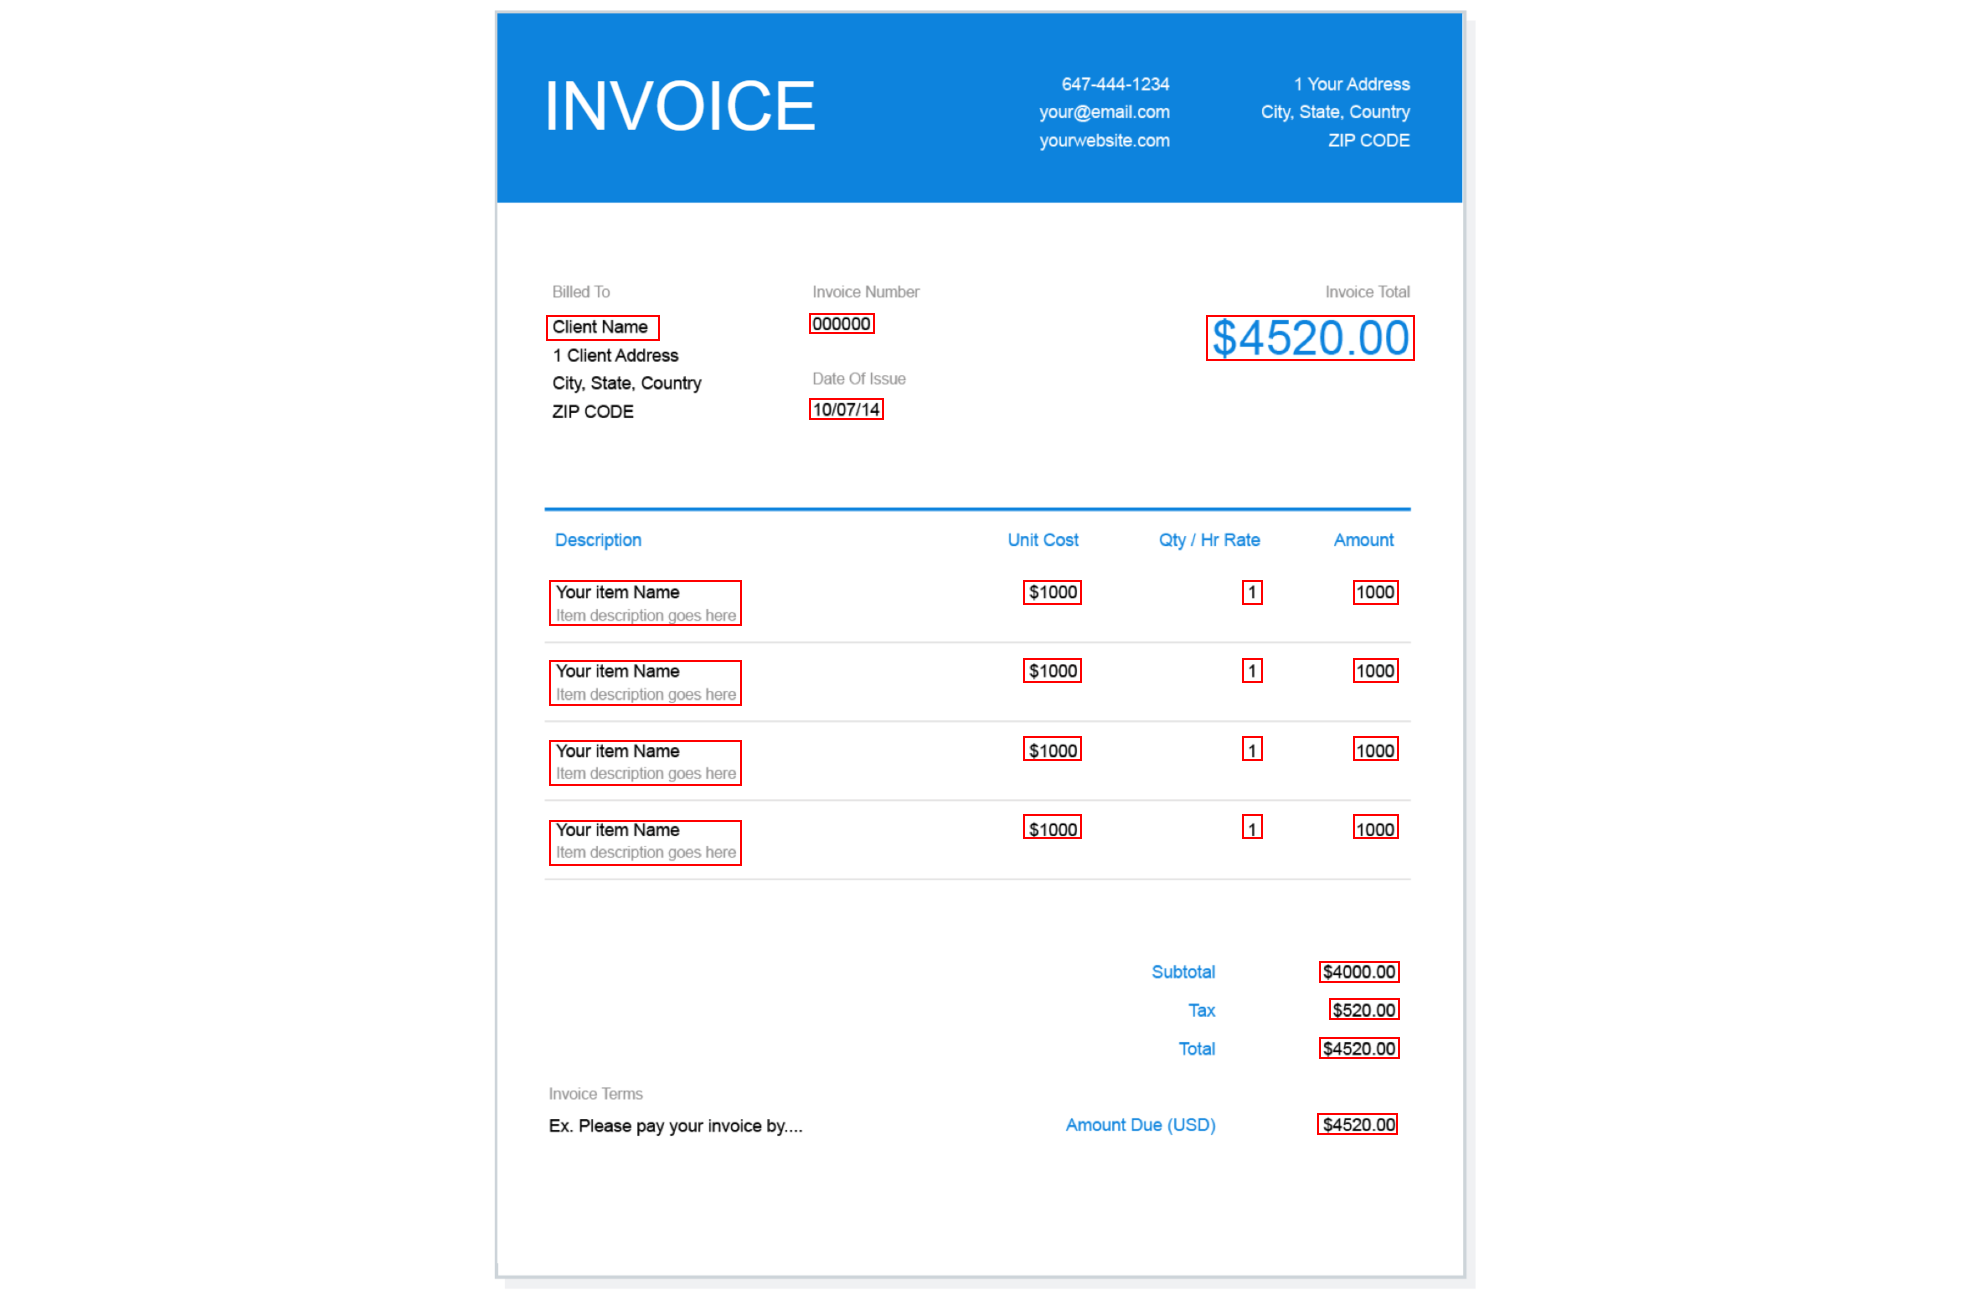 invoice with key values annotaed for NLP model training